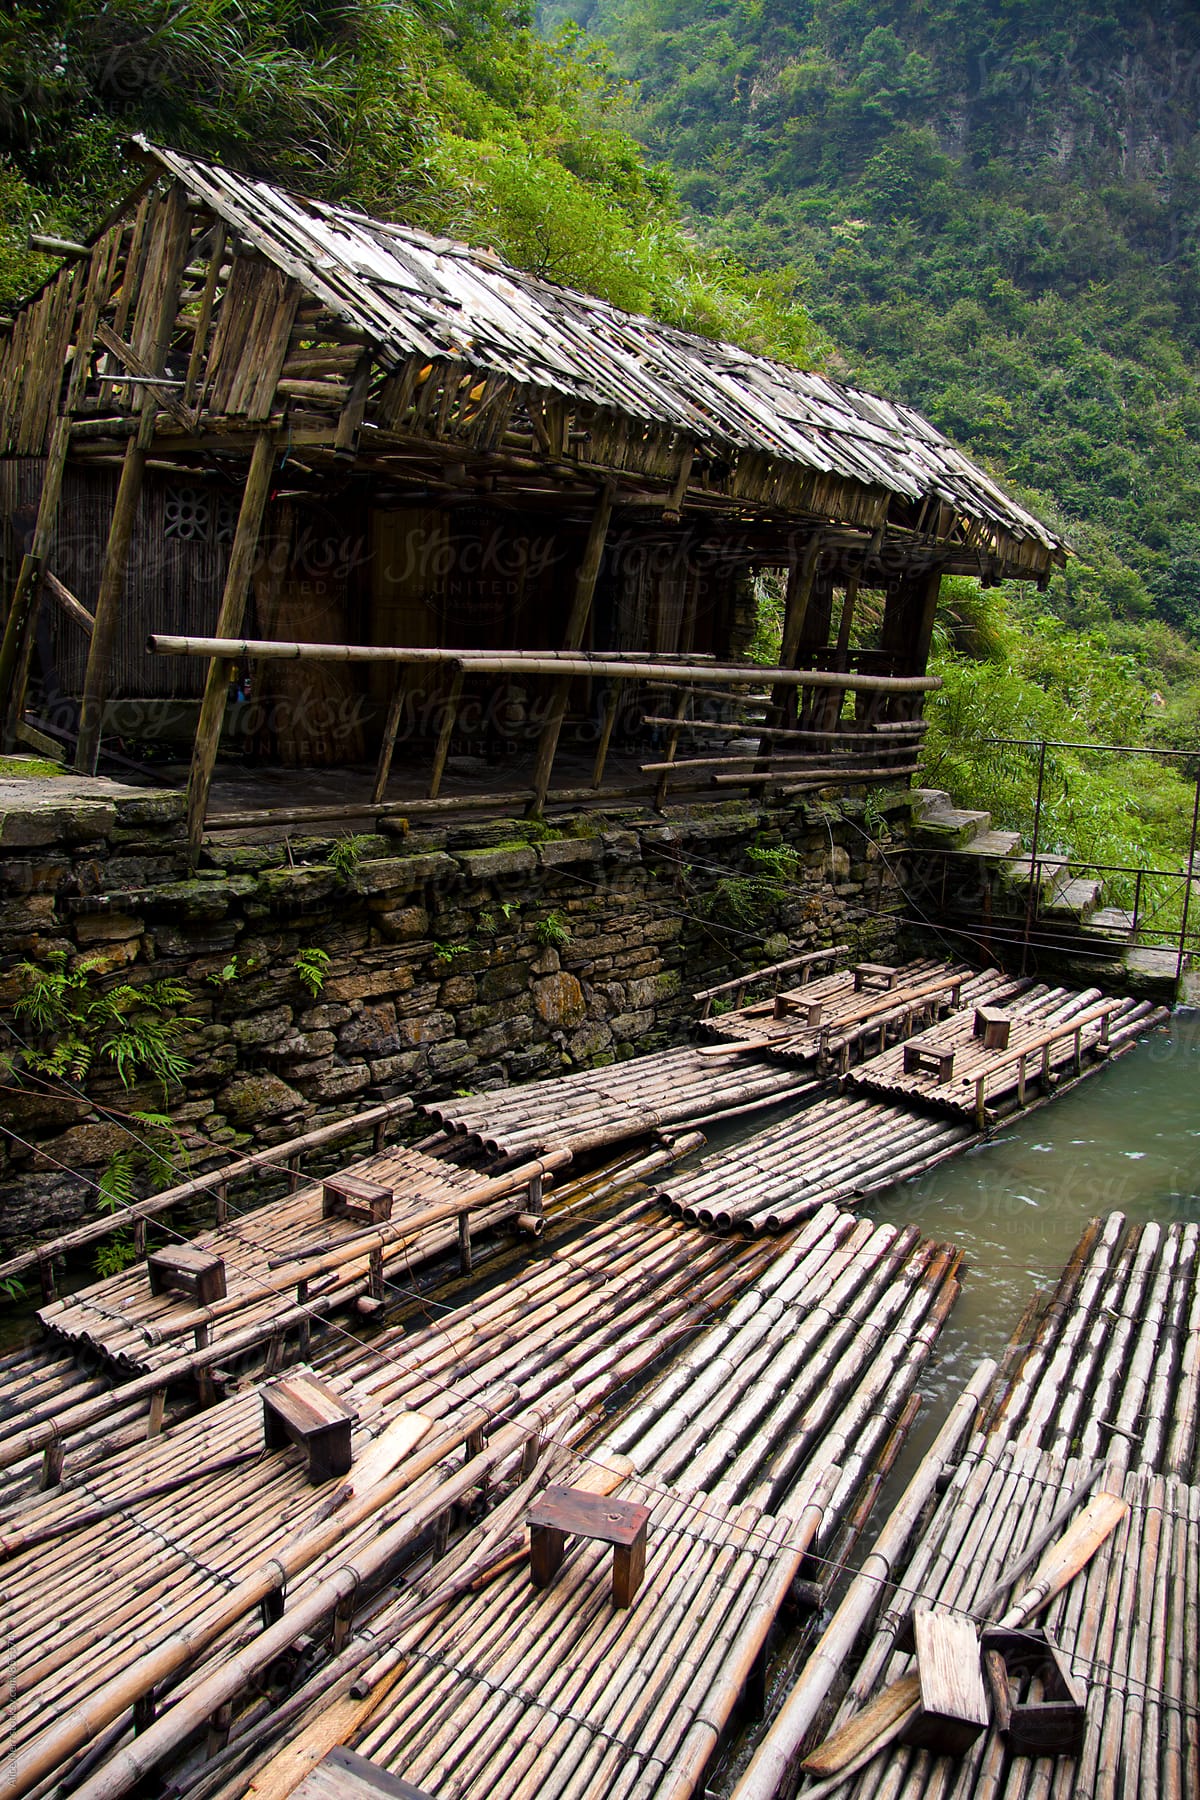 Shelter on the embankment and many rafts made of bamboo